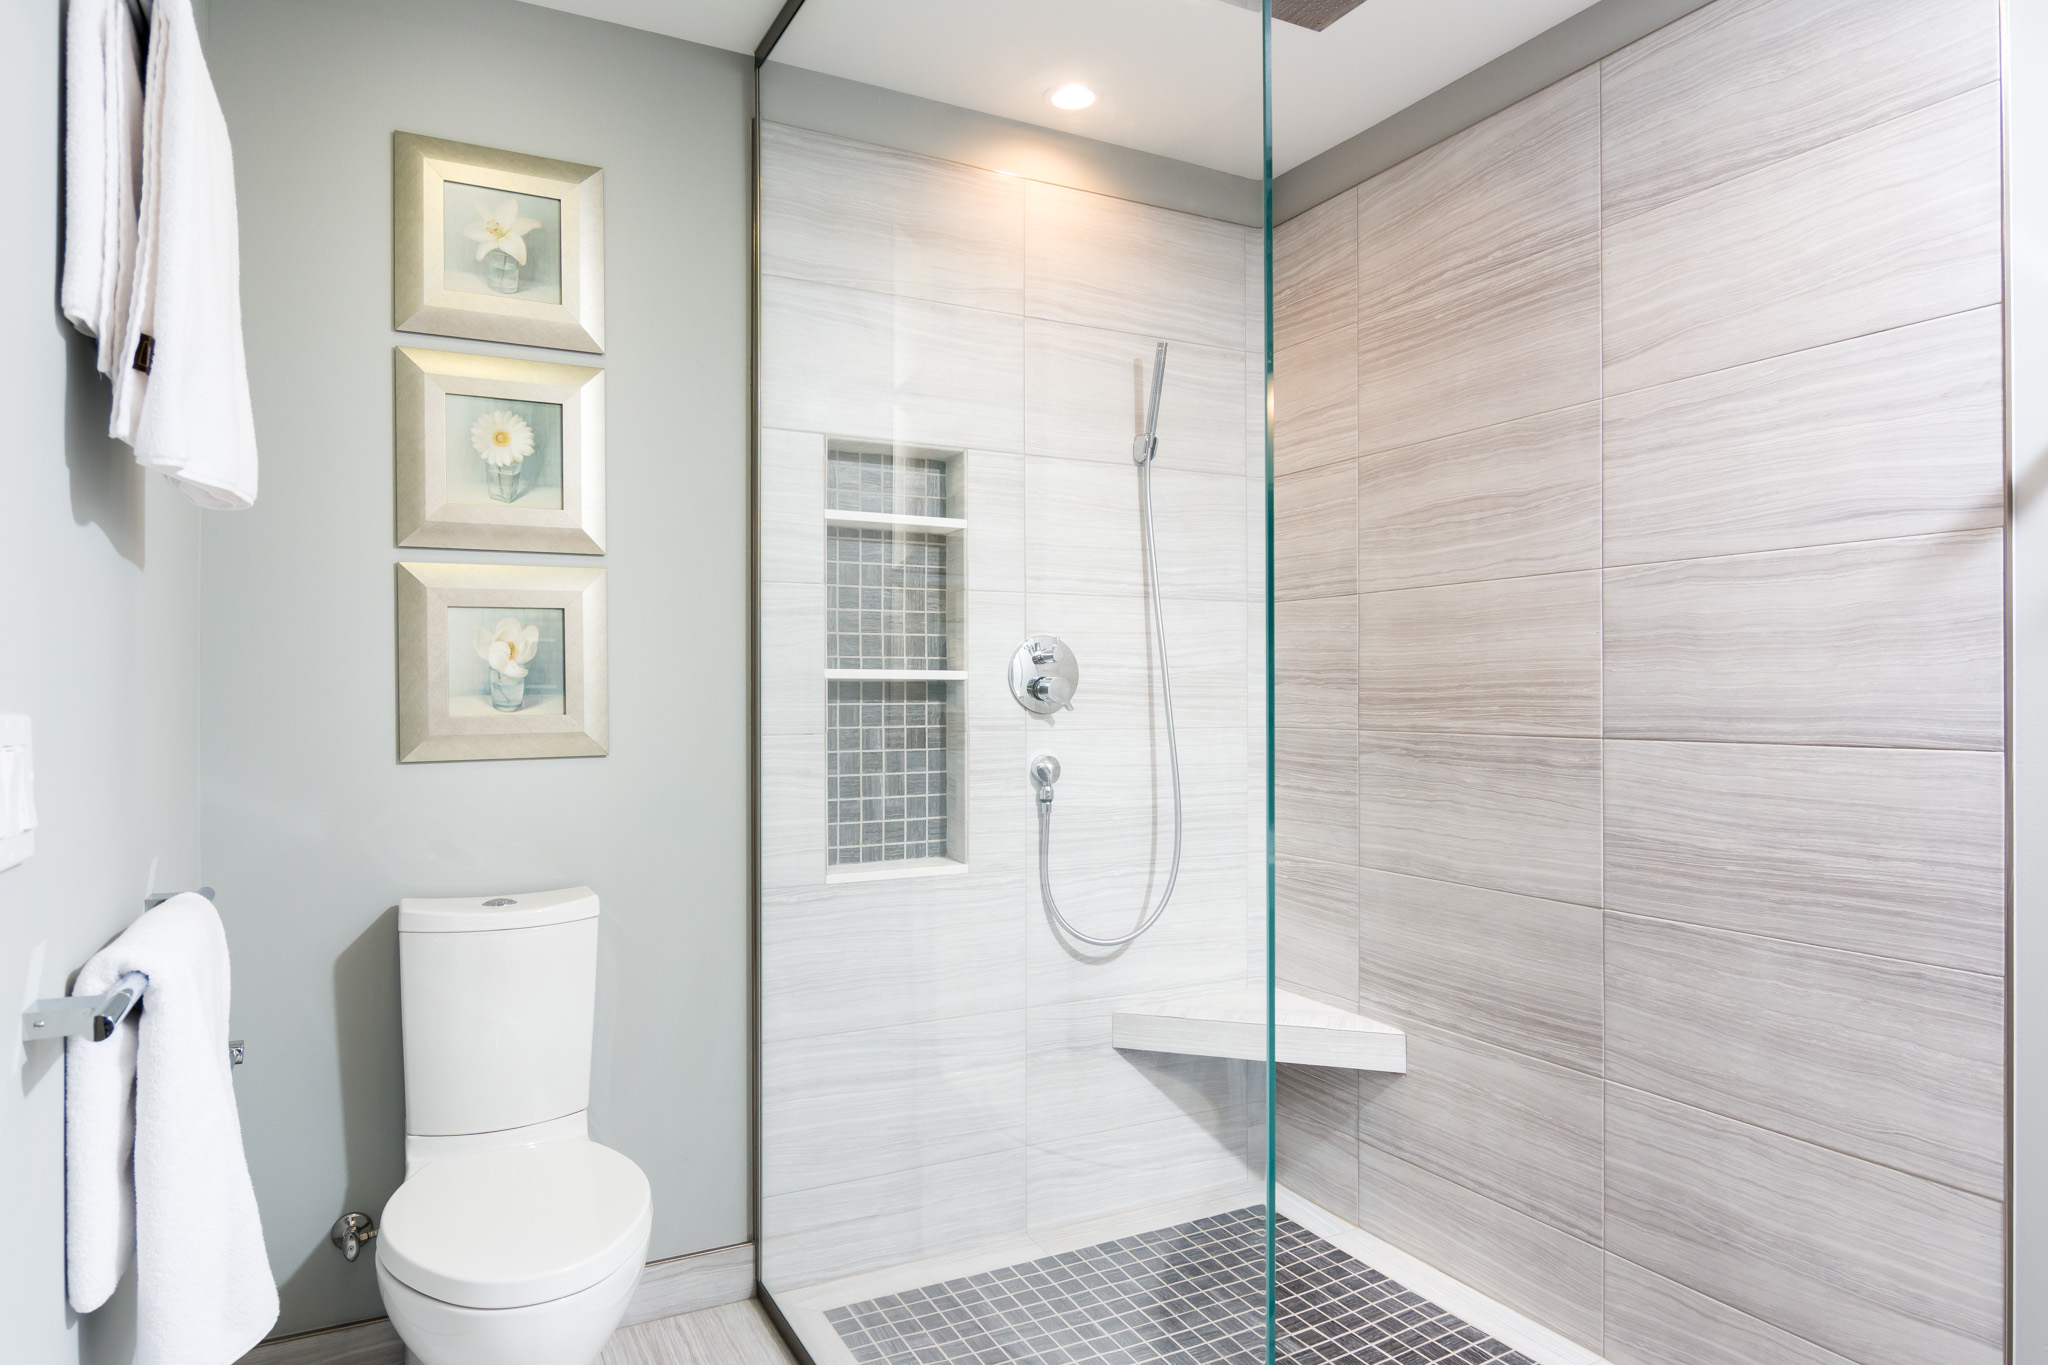 5 Shower Bench Ideas for a Bathroom Remodel